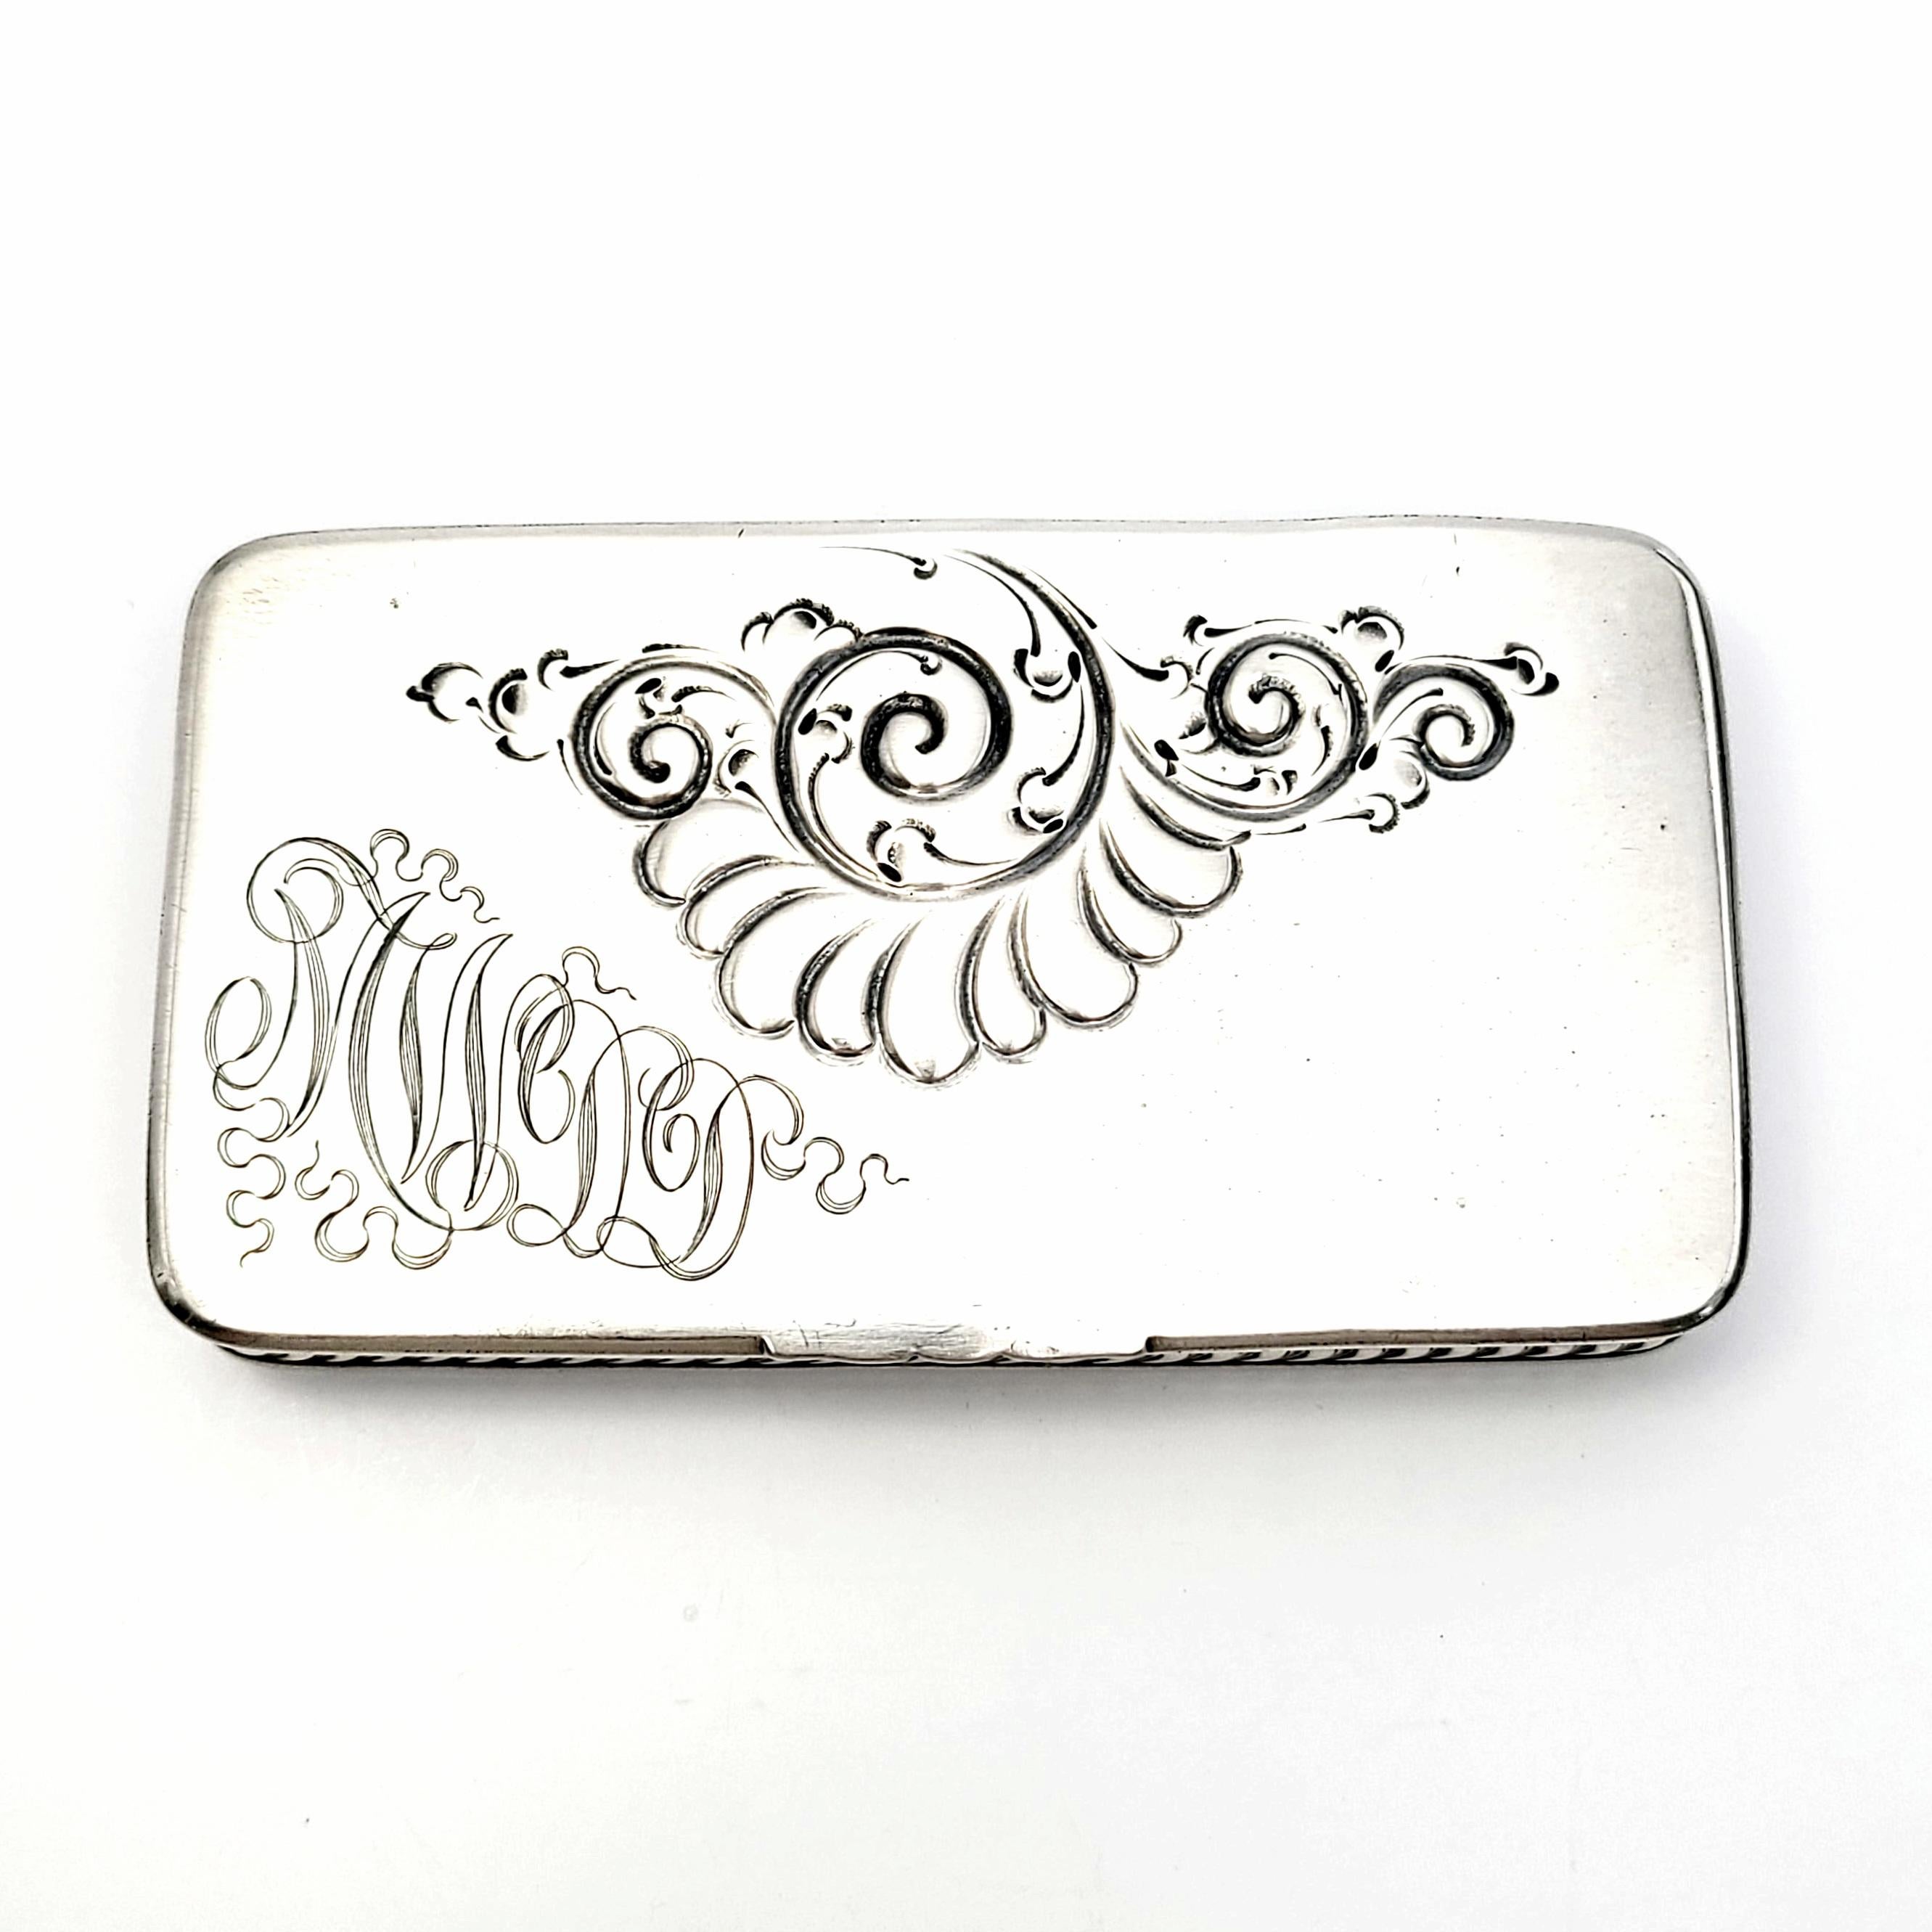 Antique sterling silver stamp box by Howard & Co, circa 1893.

Howard & Co of NY, NY from 1866-1922, created this stamp box with 3 interior compartments. Rope edging details, repousse swirl design on the lid with an ornate monogram.

Monogram